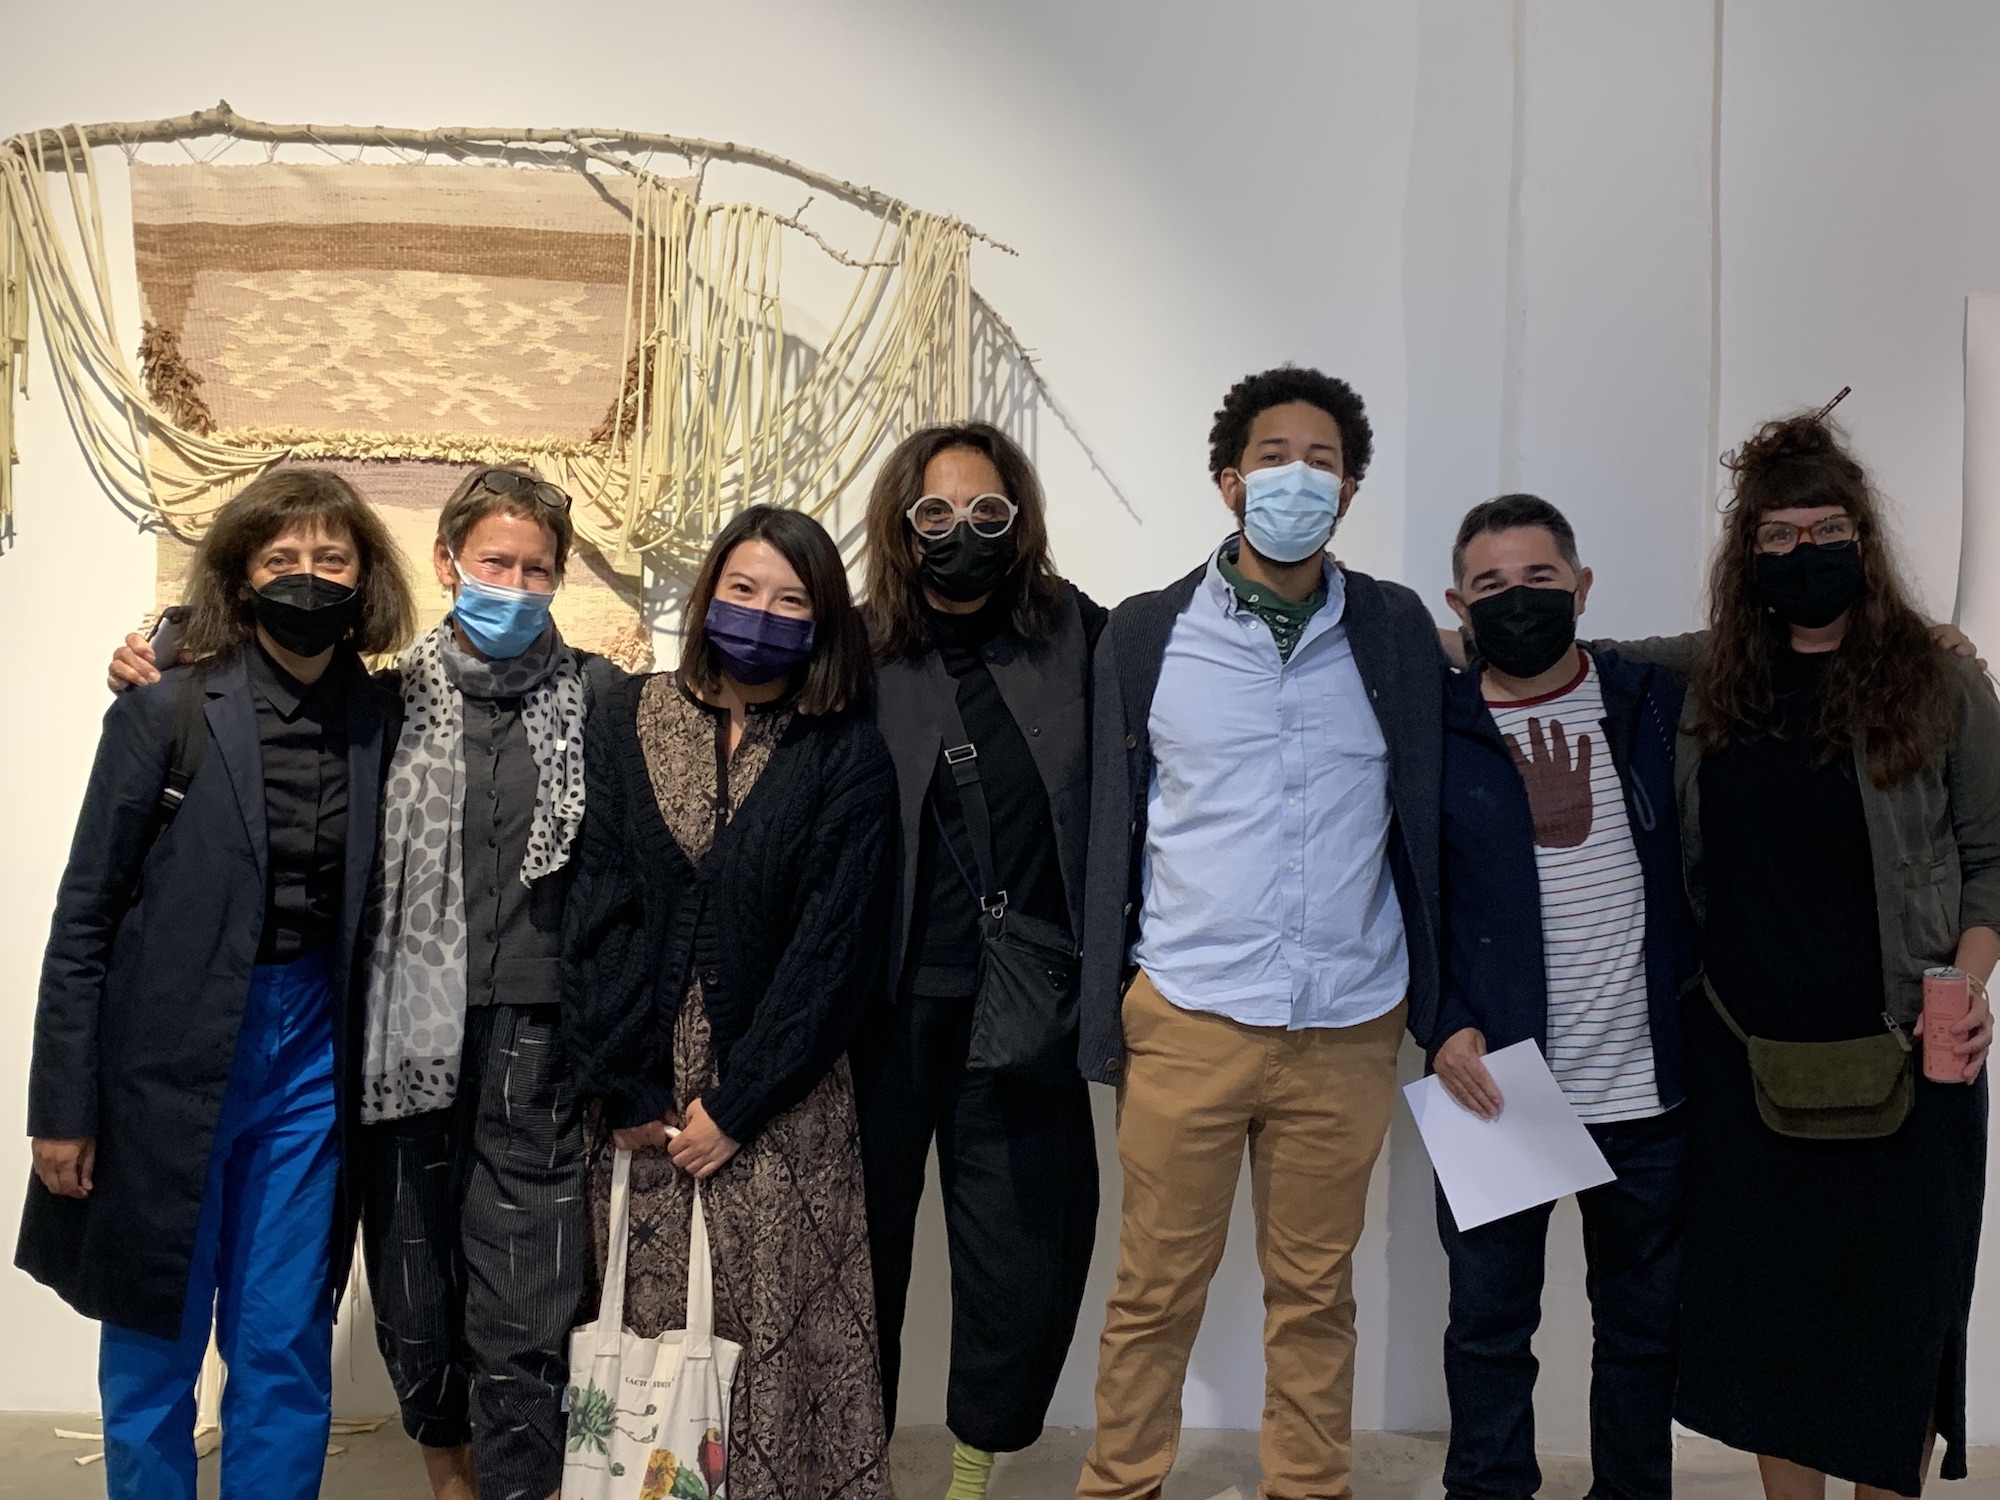 In October 2021, the residency artists visited the exhibition opening of “Adaptive Immunity” by the director of SFAI Toni Gentilli in Albuquerque, New Mexico.